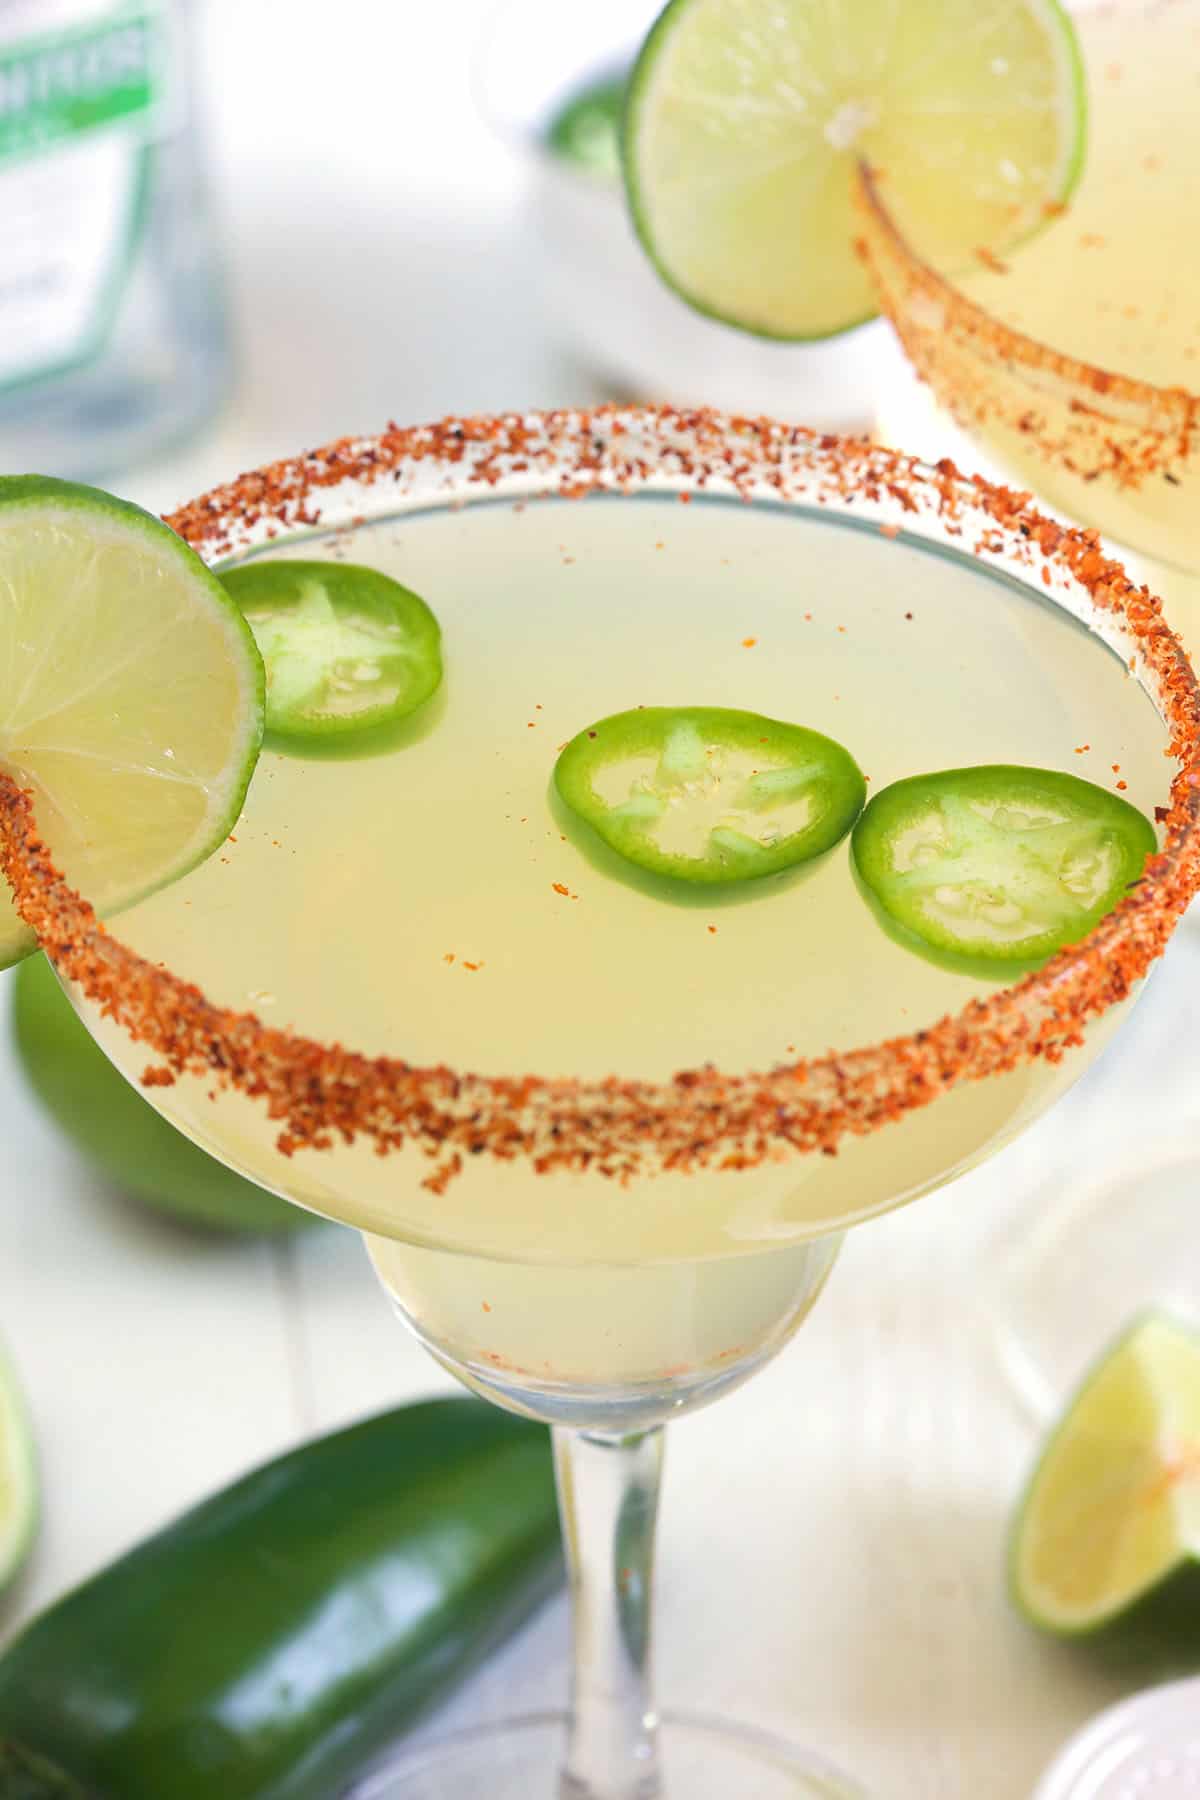 Three jalapeno slices are floating at the top of a margarita glass.